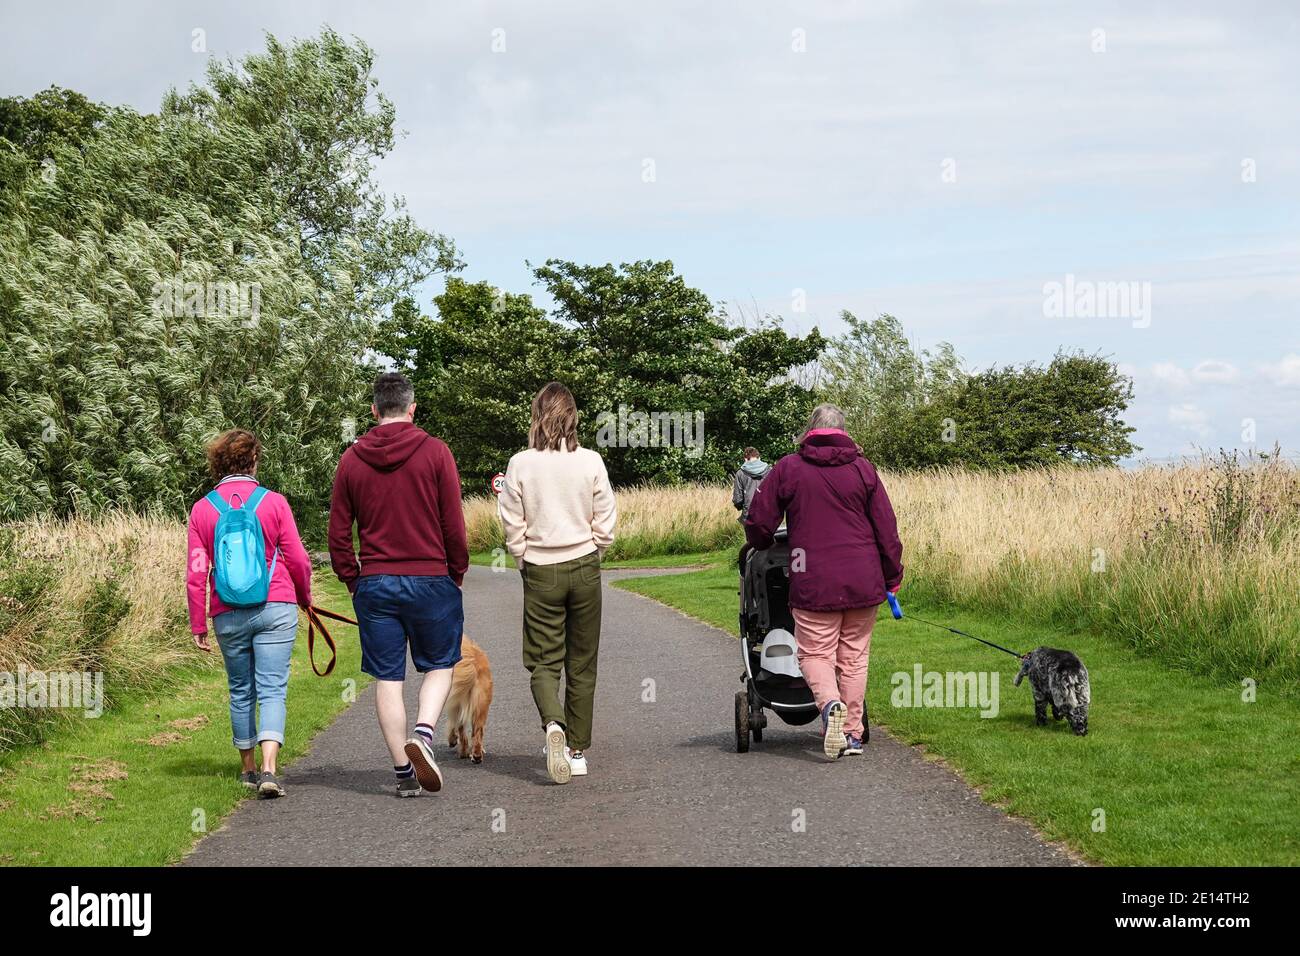 Family group with dogs and child push chair Stock Photo